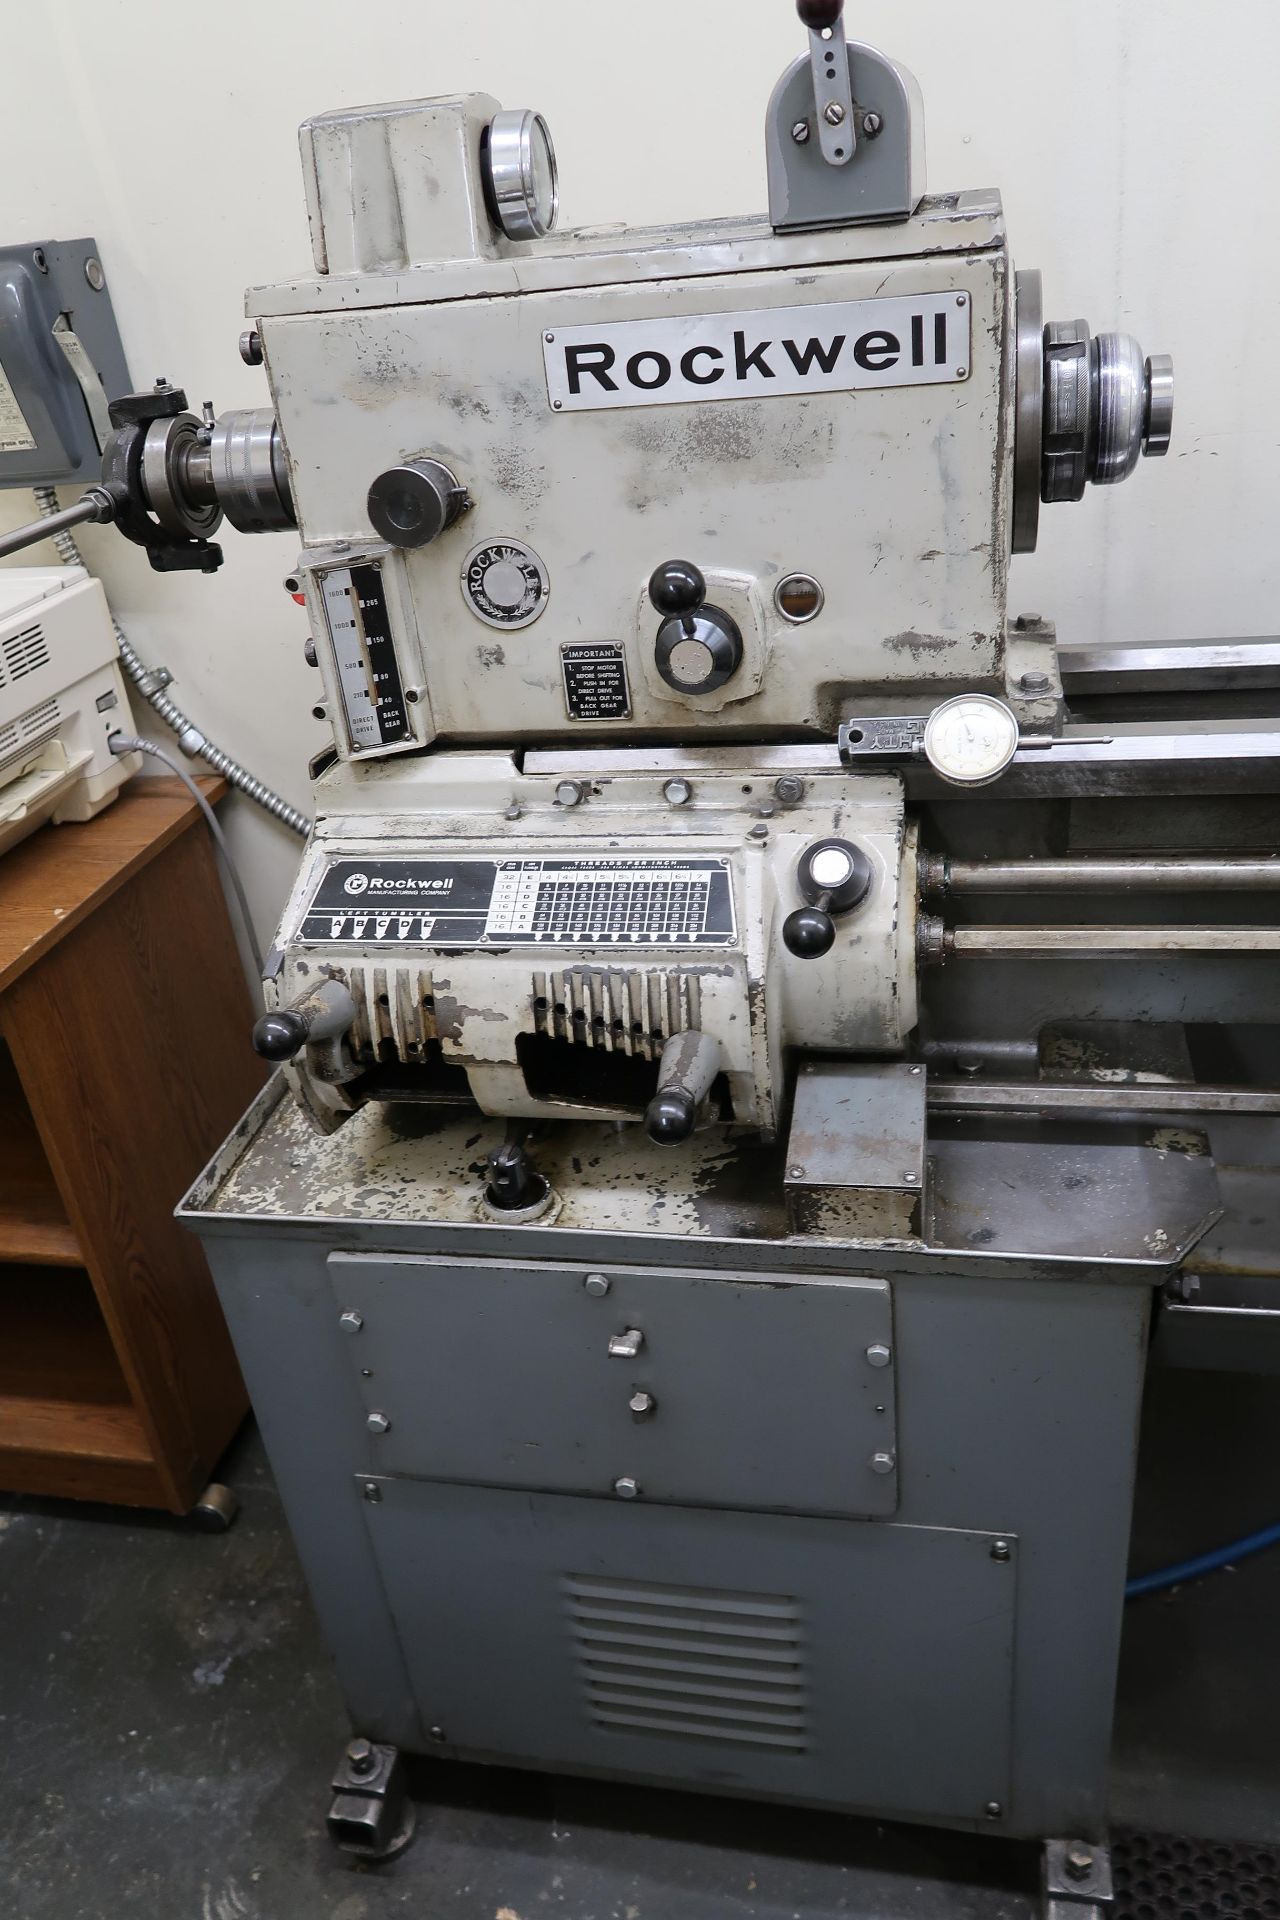 Rockwell “Delta 14” 14” x 45” Lathe s/n 1403561 w 40-1600 Adjustable RPM, (SOLD AS IS) - Image 2 of 9